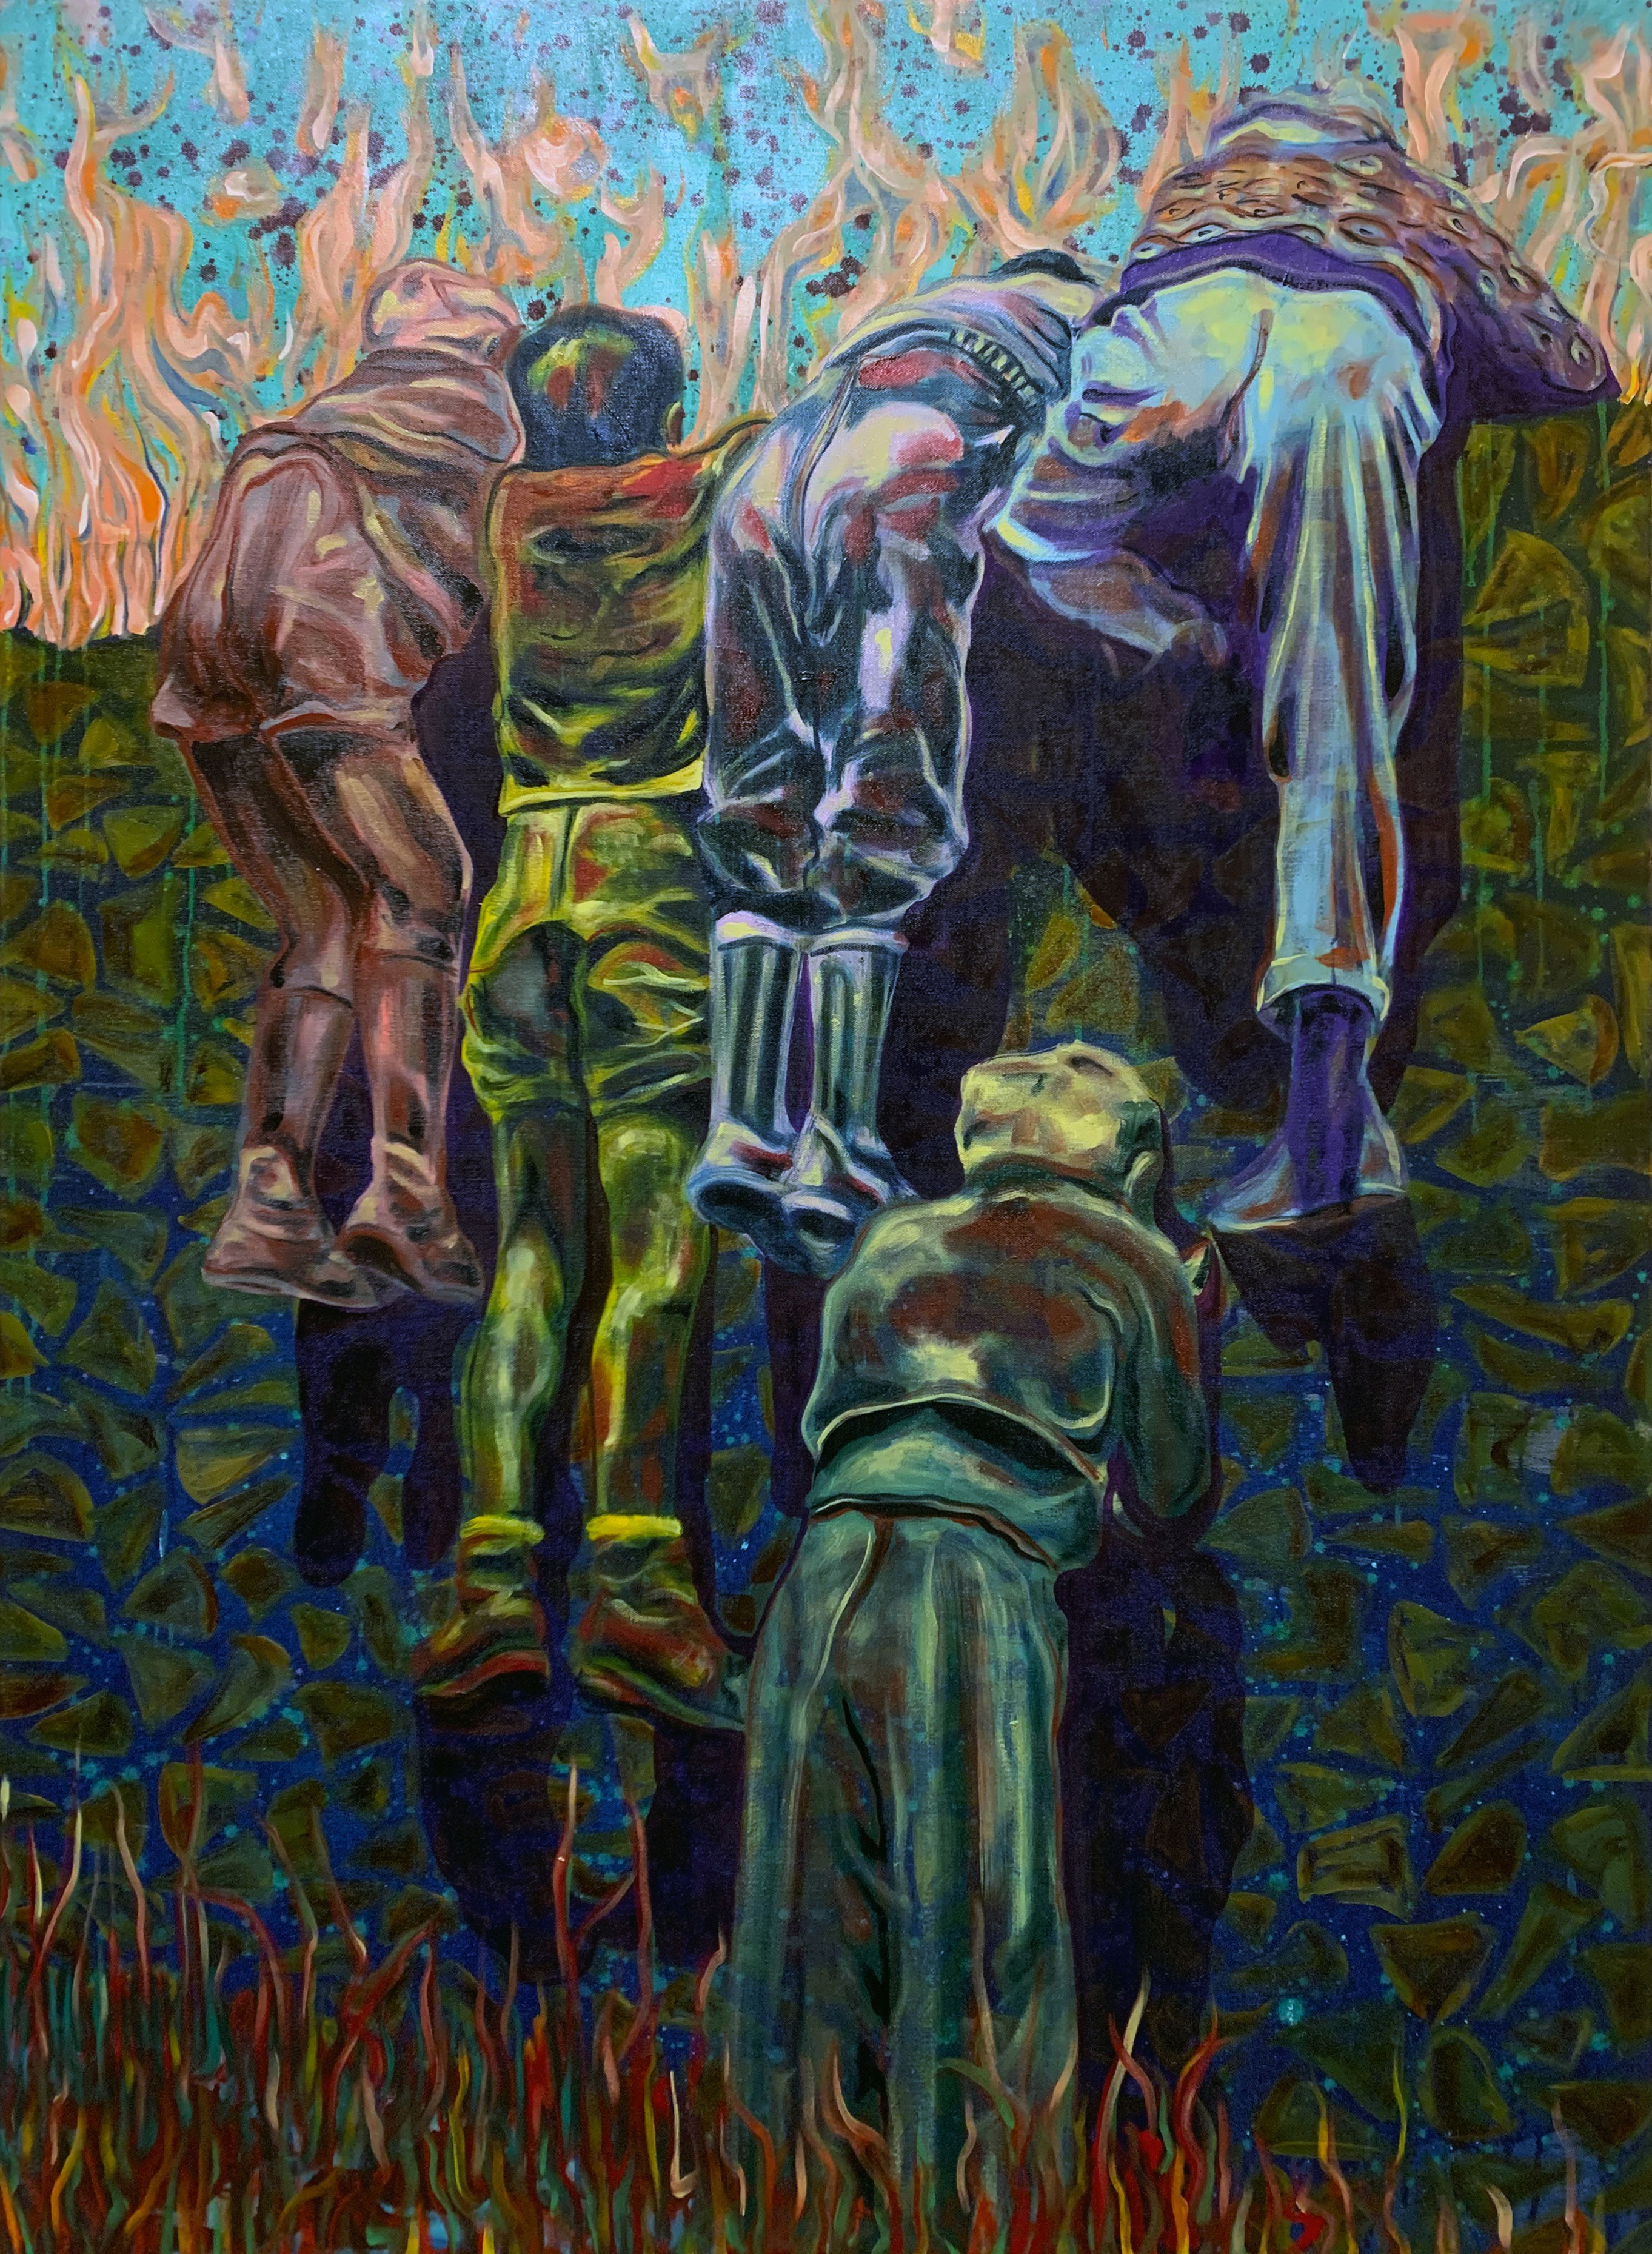 Through the Thick and Thin
2022
oil on canvas
150 x 110cm